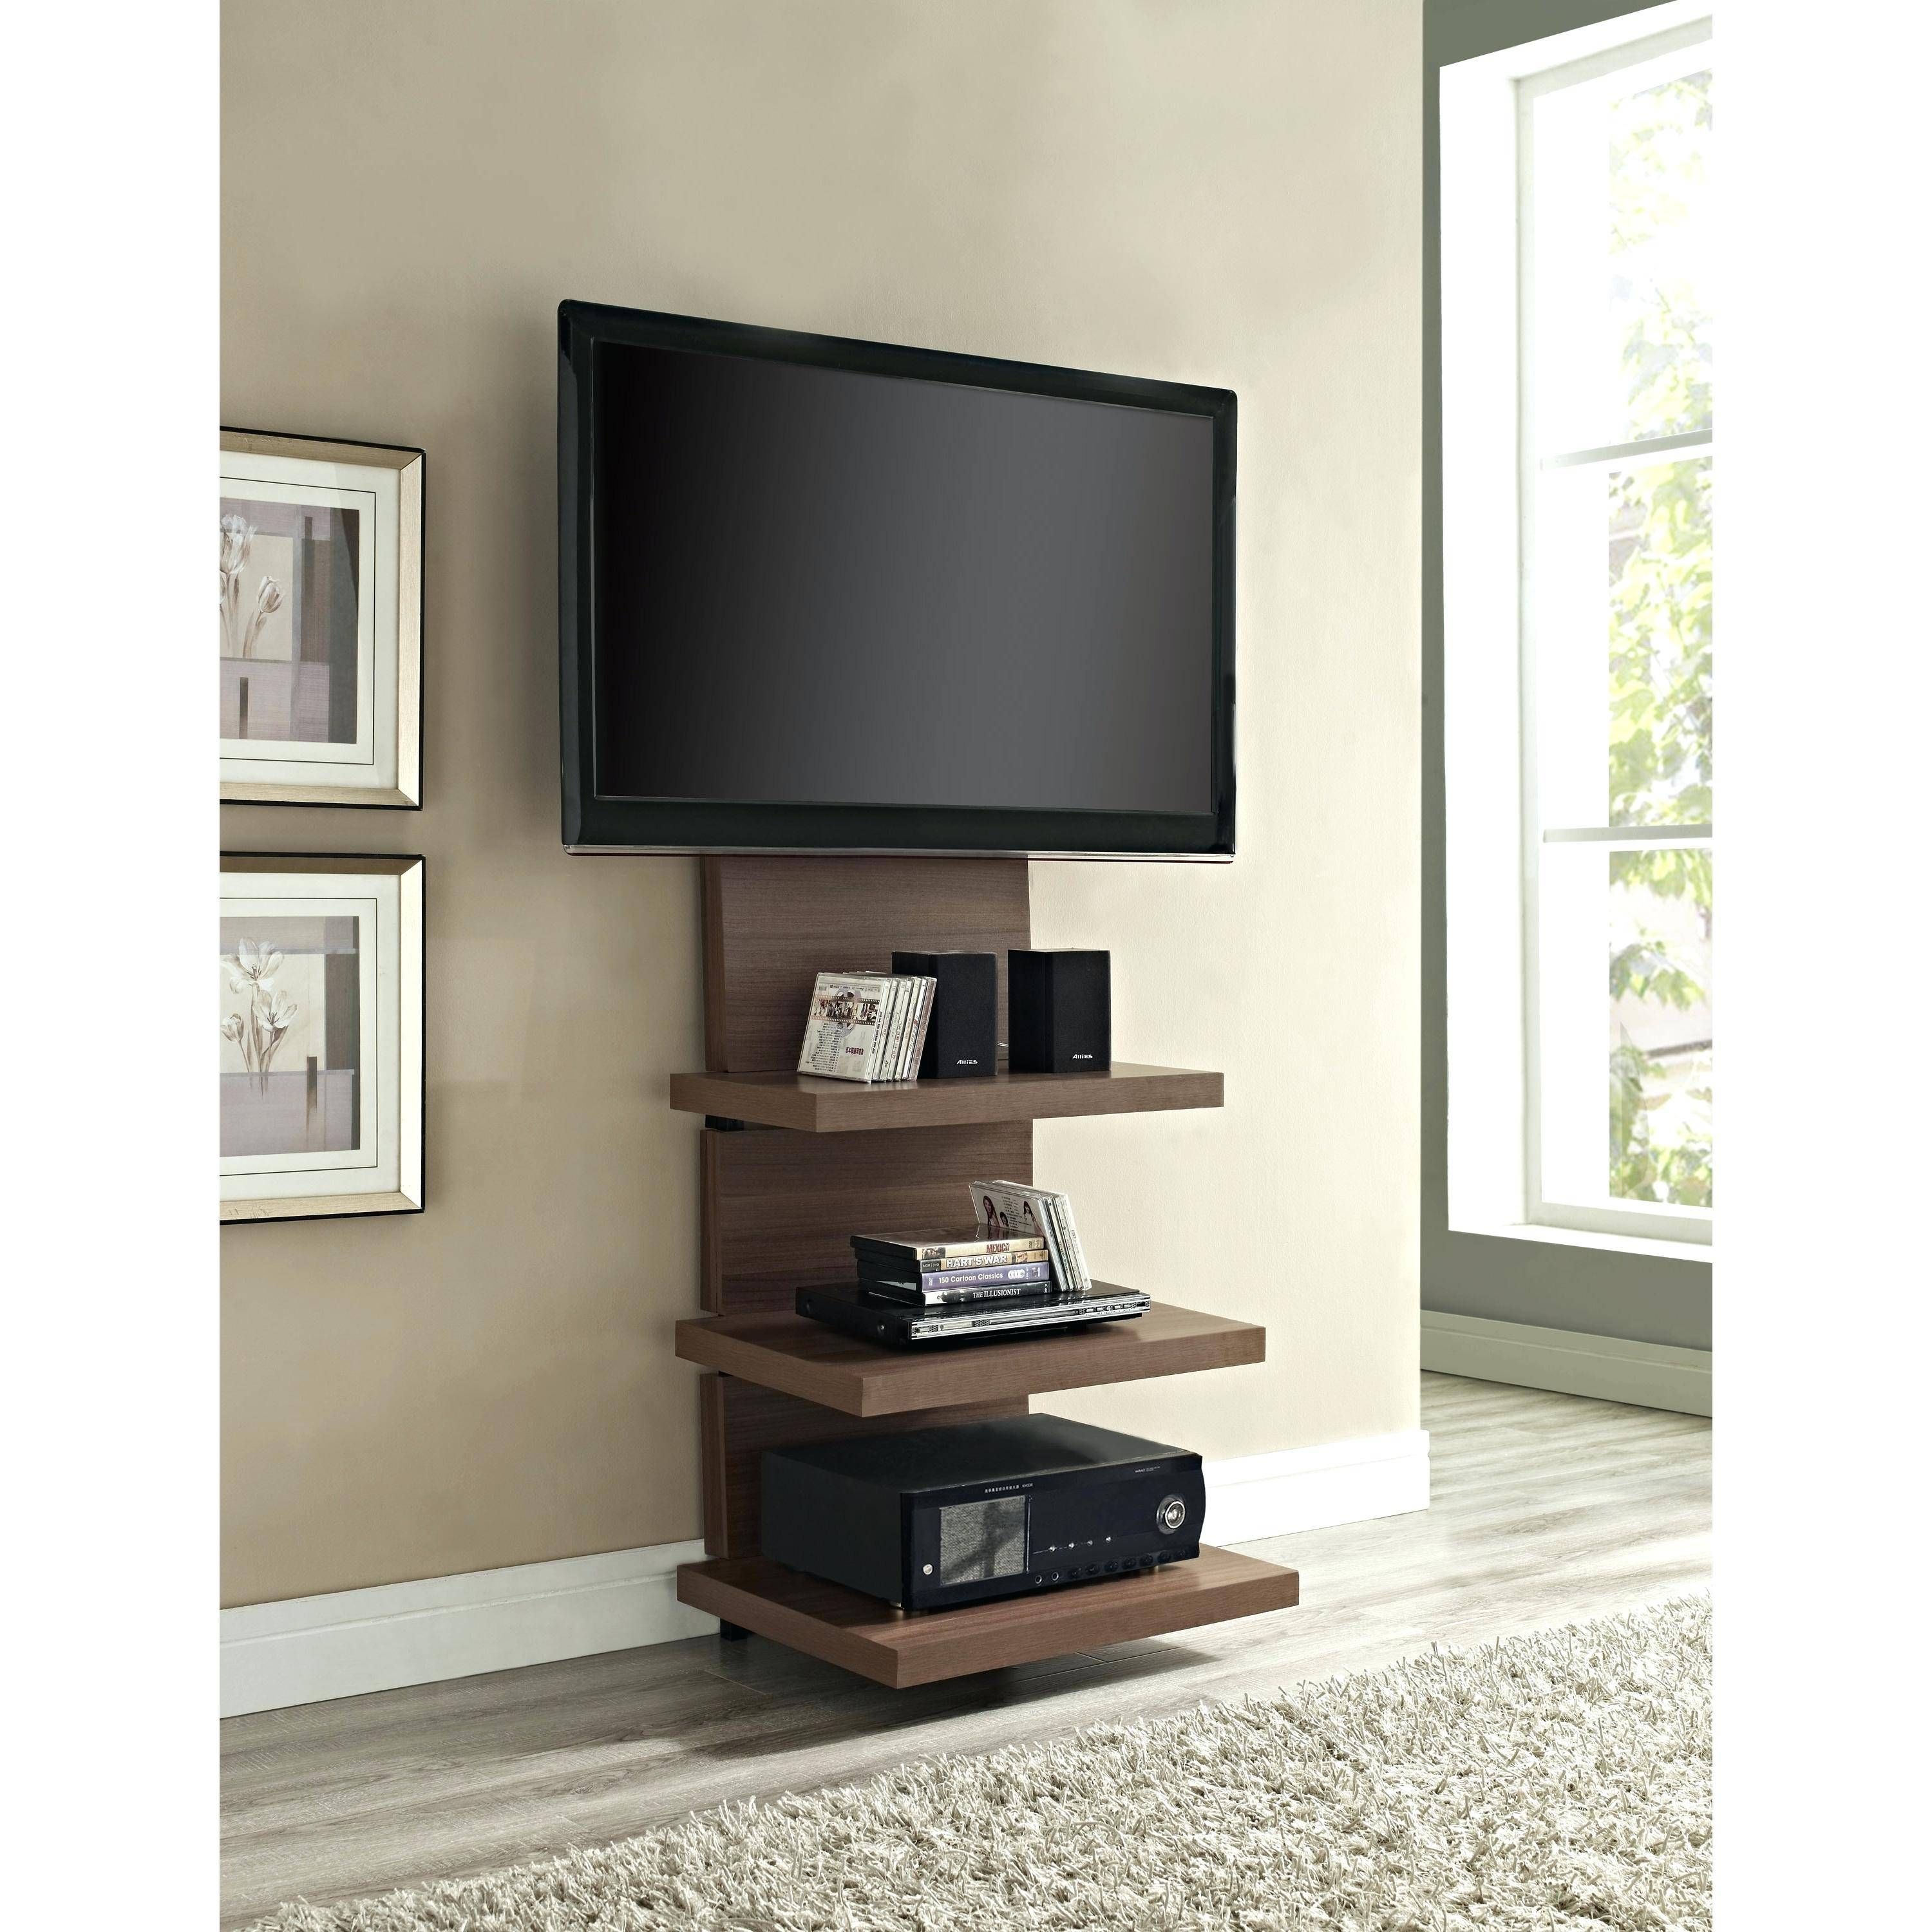 Tv Stand : Appealing White Painted Mahogany Wood Corner Tv Stand Regarding Tv Stands 38 Inches Wide (View 11 of 15)